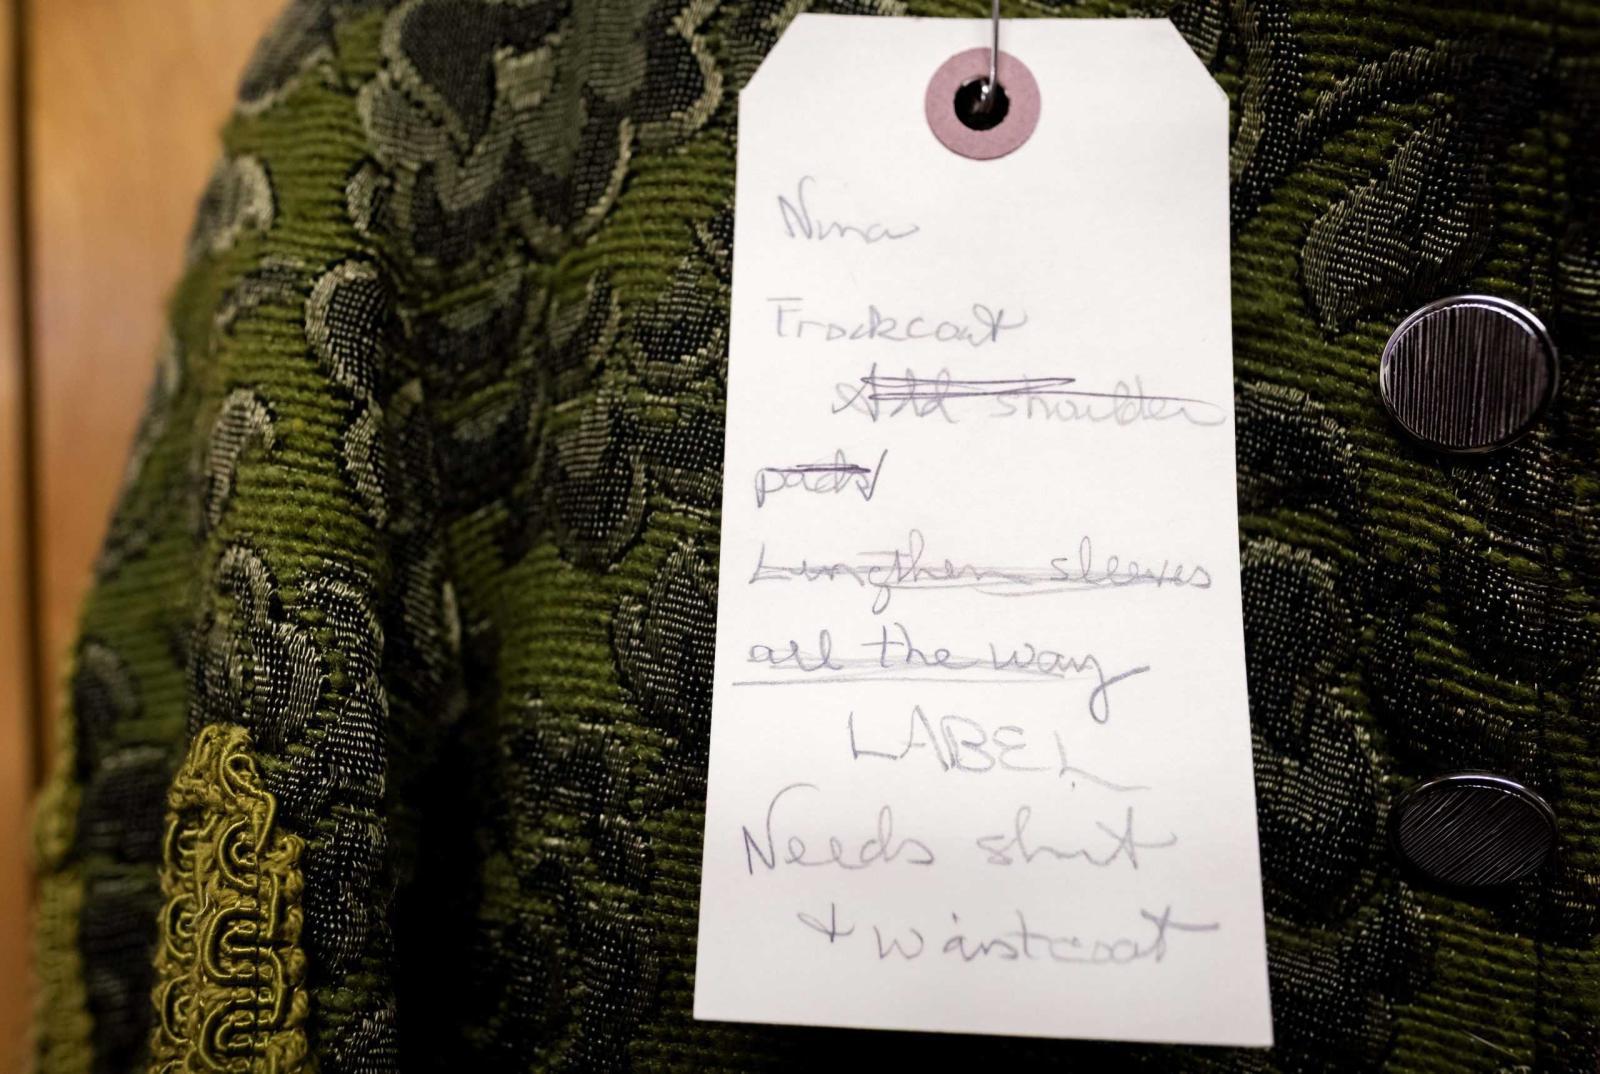 Notes for a costume that will be used for Molière Inspired are written on a label and attached to the costumes.